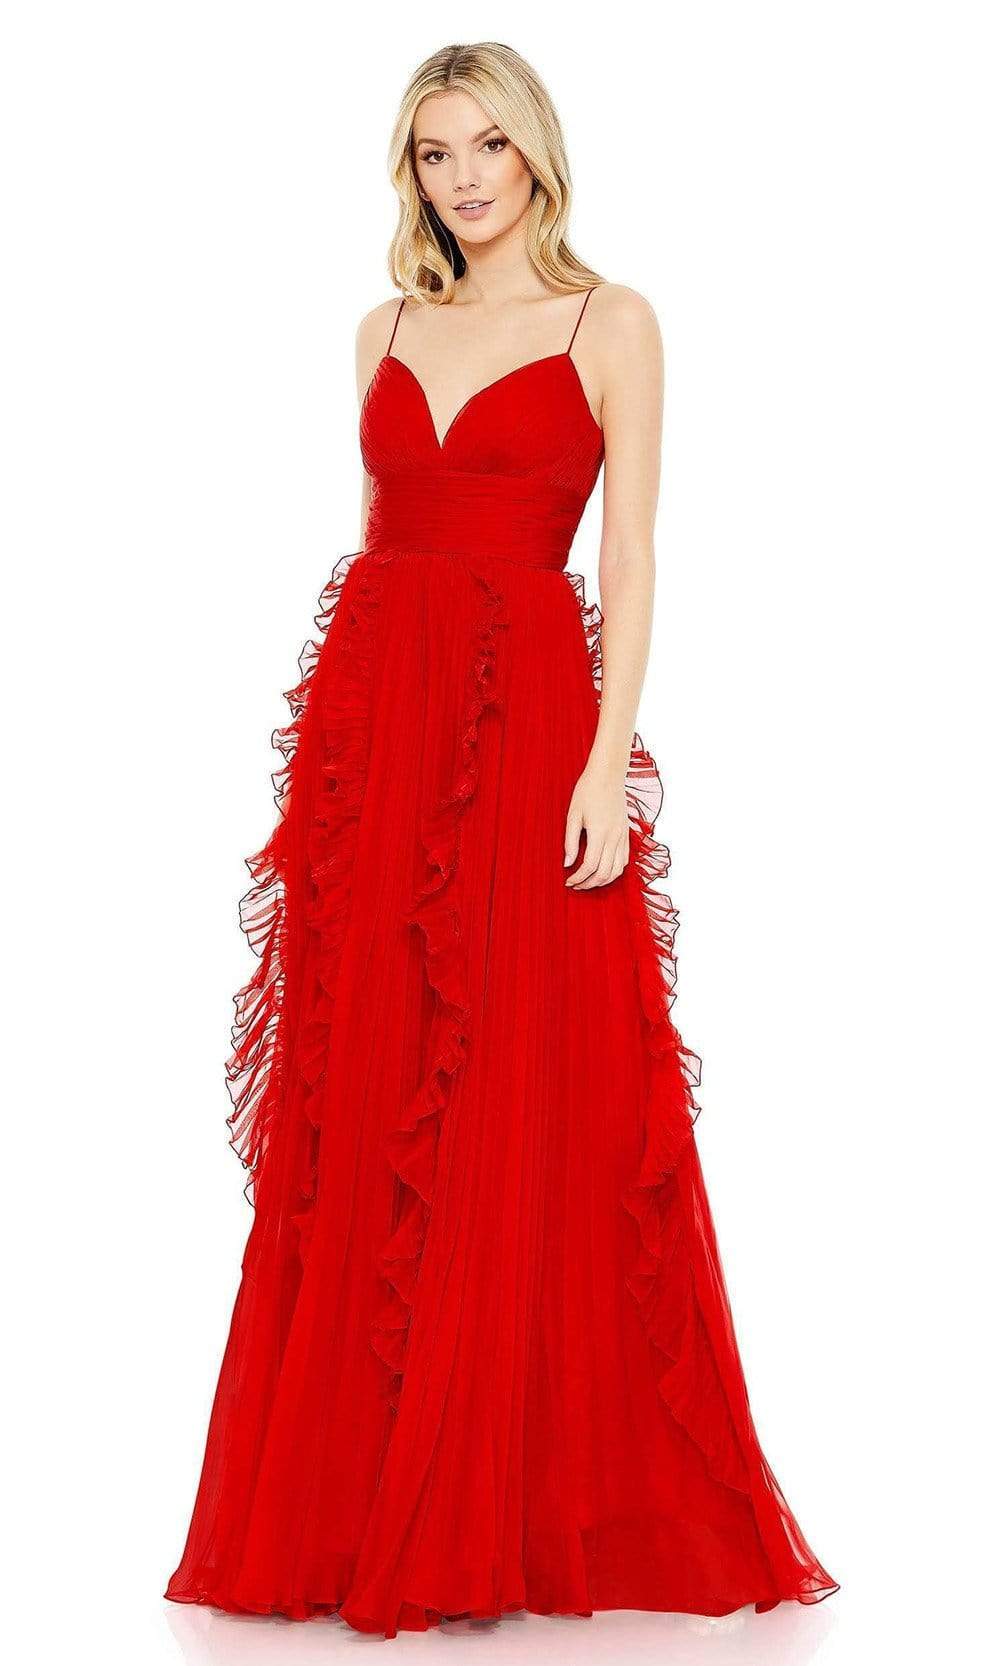 Ieena Duggal - 49533 Ruffle Trimmed A-Line Gown Special Occasion Dress 0 / Red